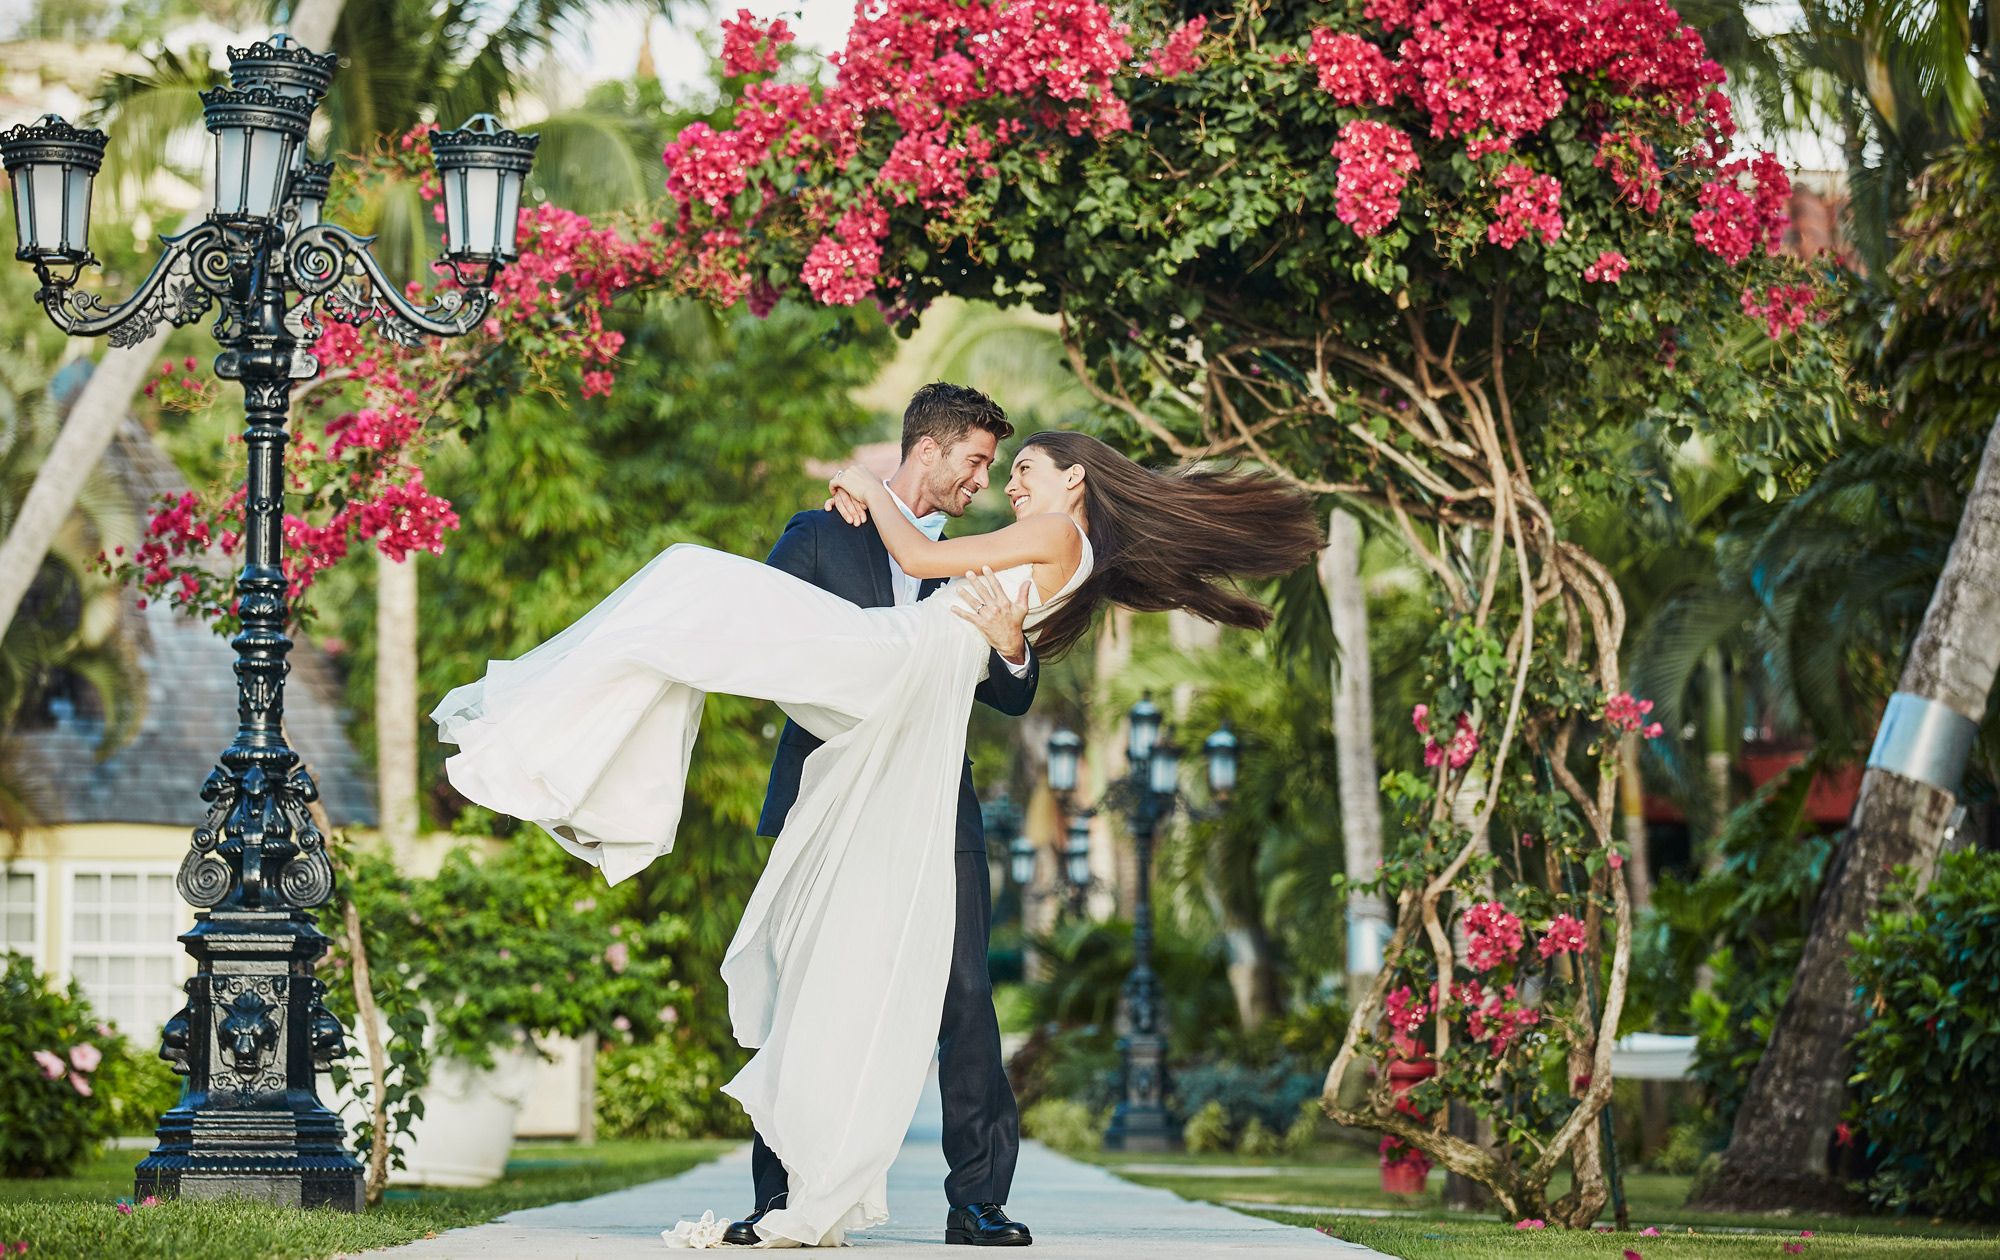 Love is in The Air At Sandals!